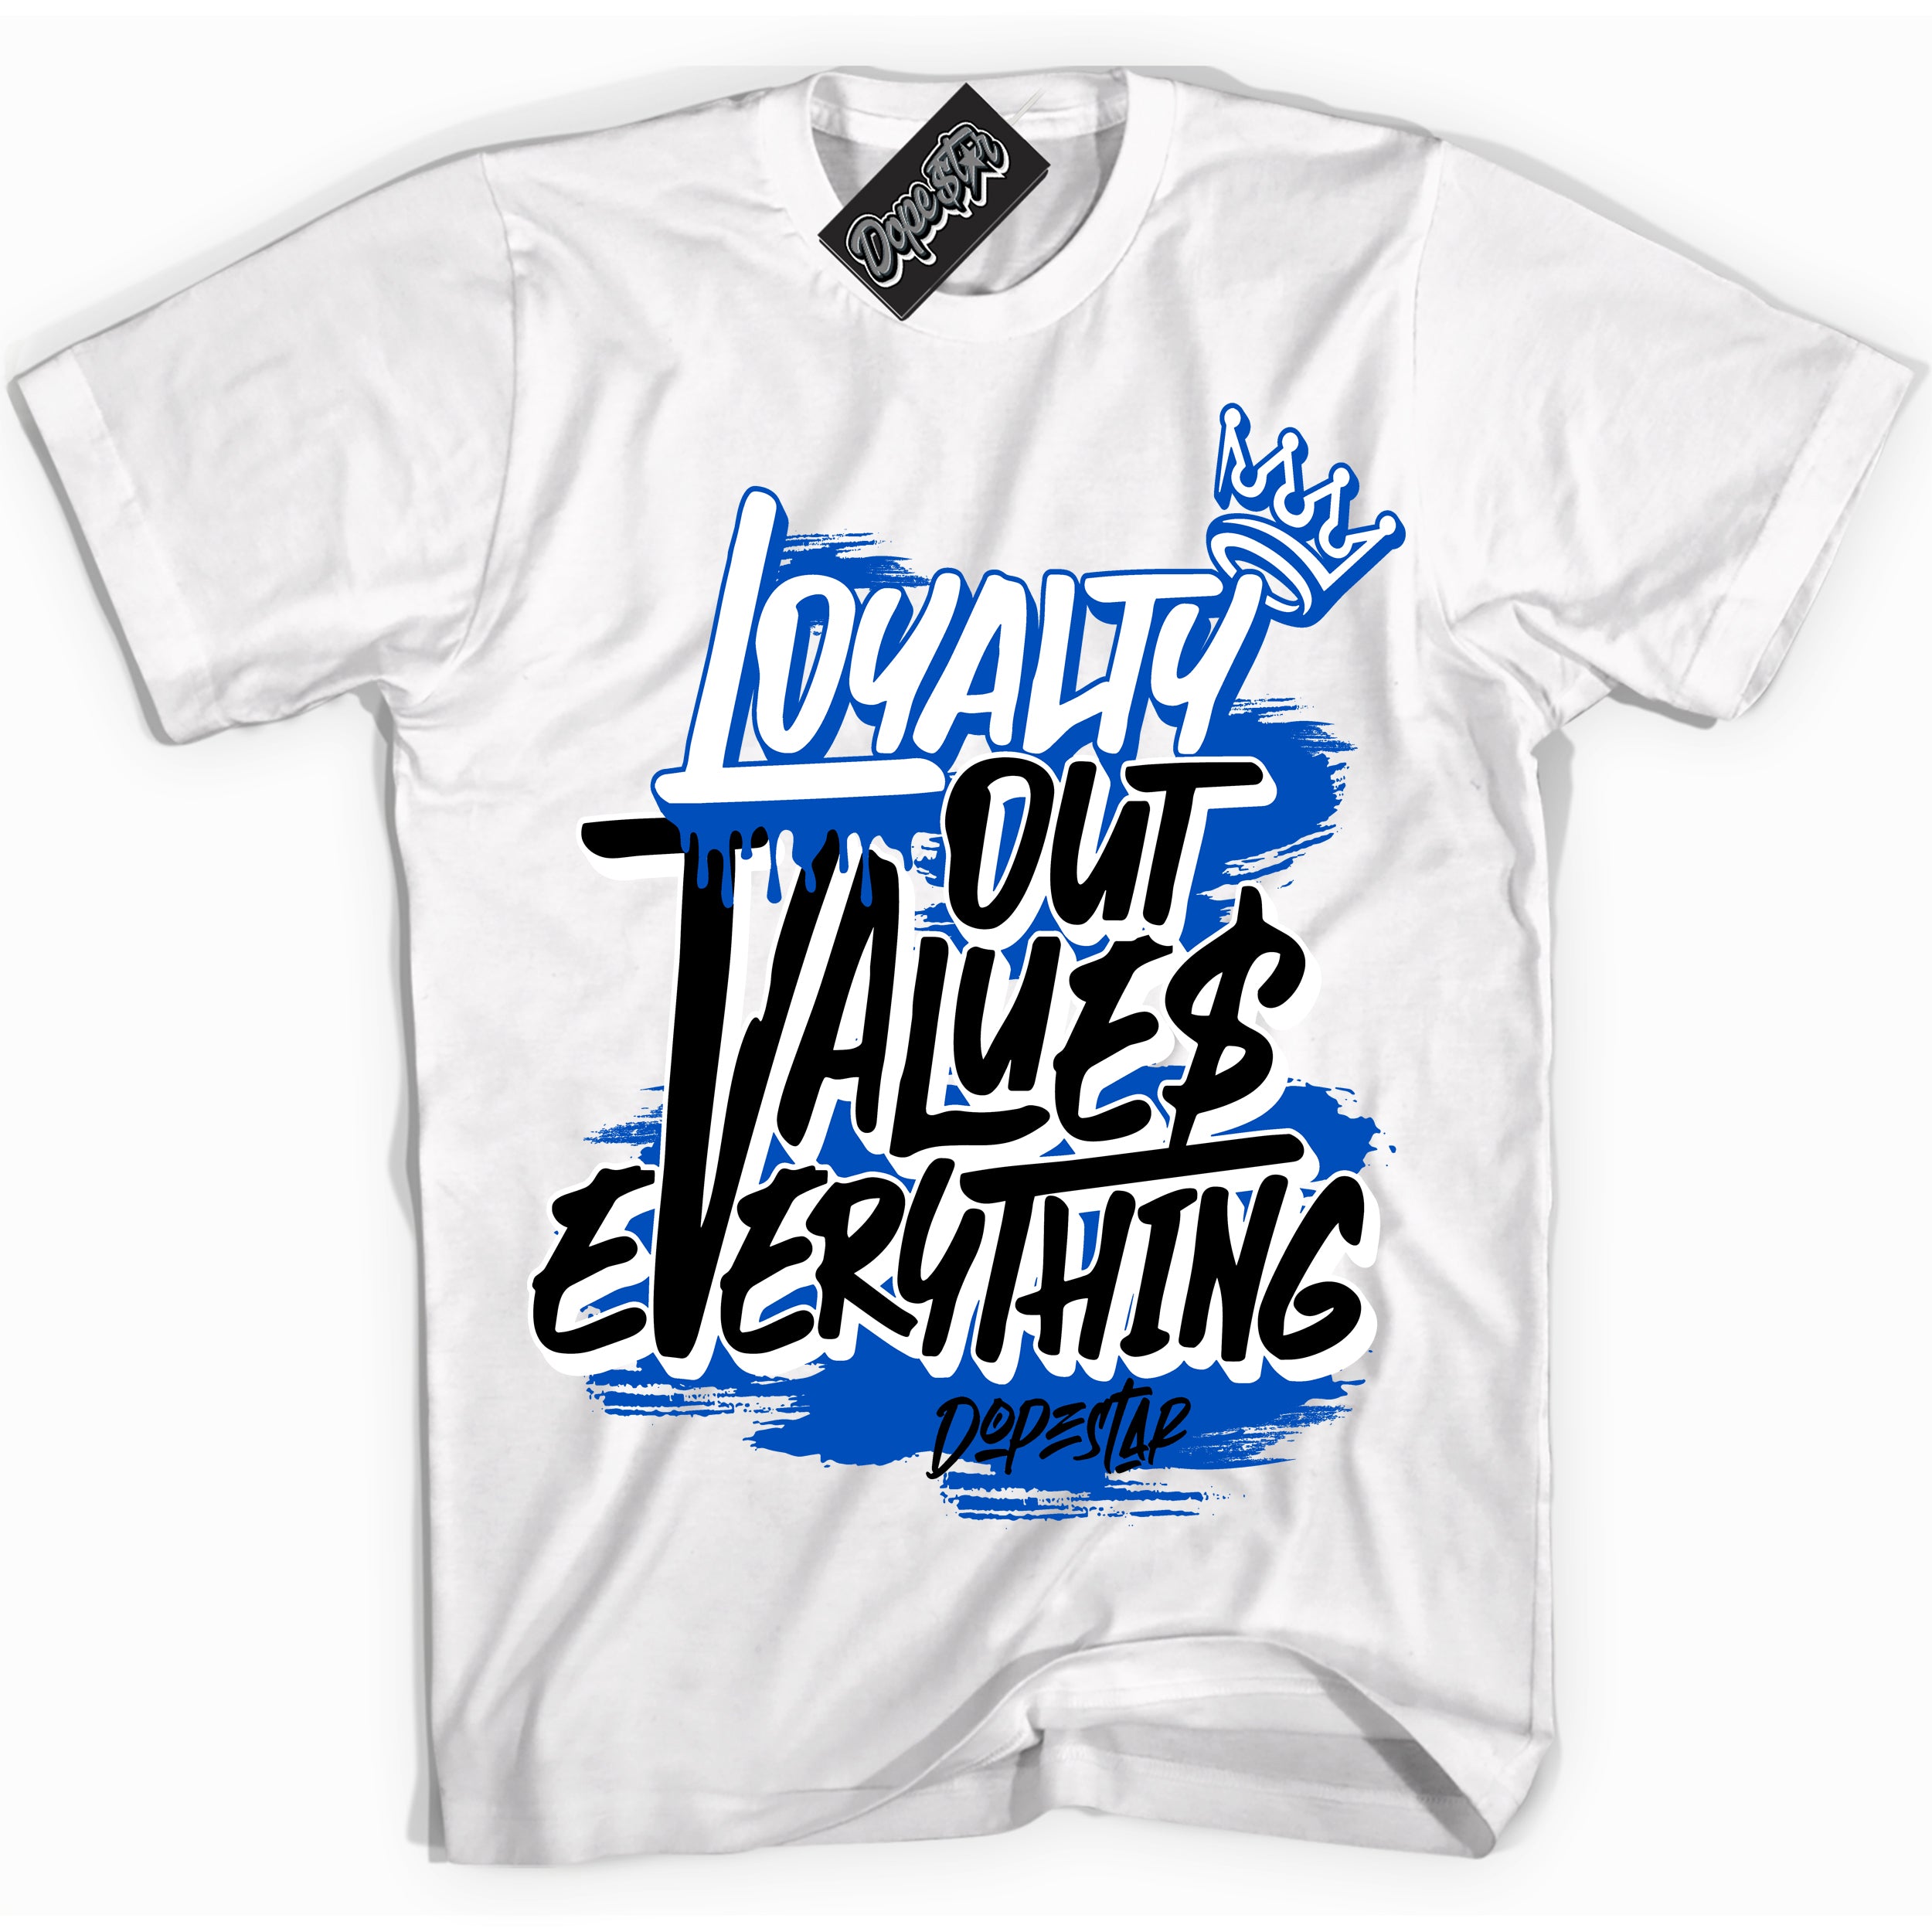 Cool White Shirt with “ Loyalty Out Values Everything” design that perfectly matches Royal Reimagined 1s Sneakers.